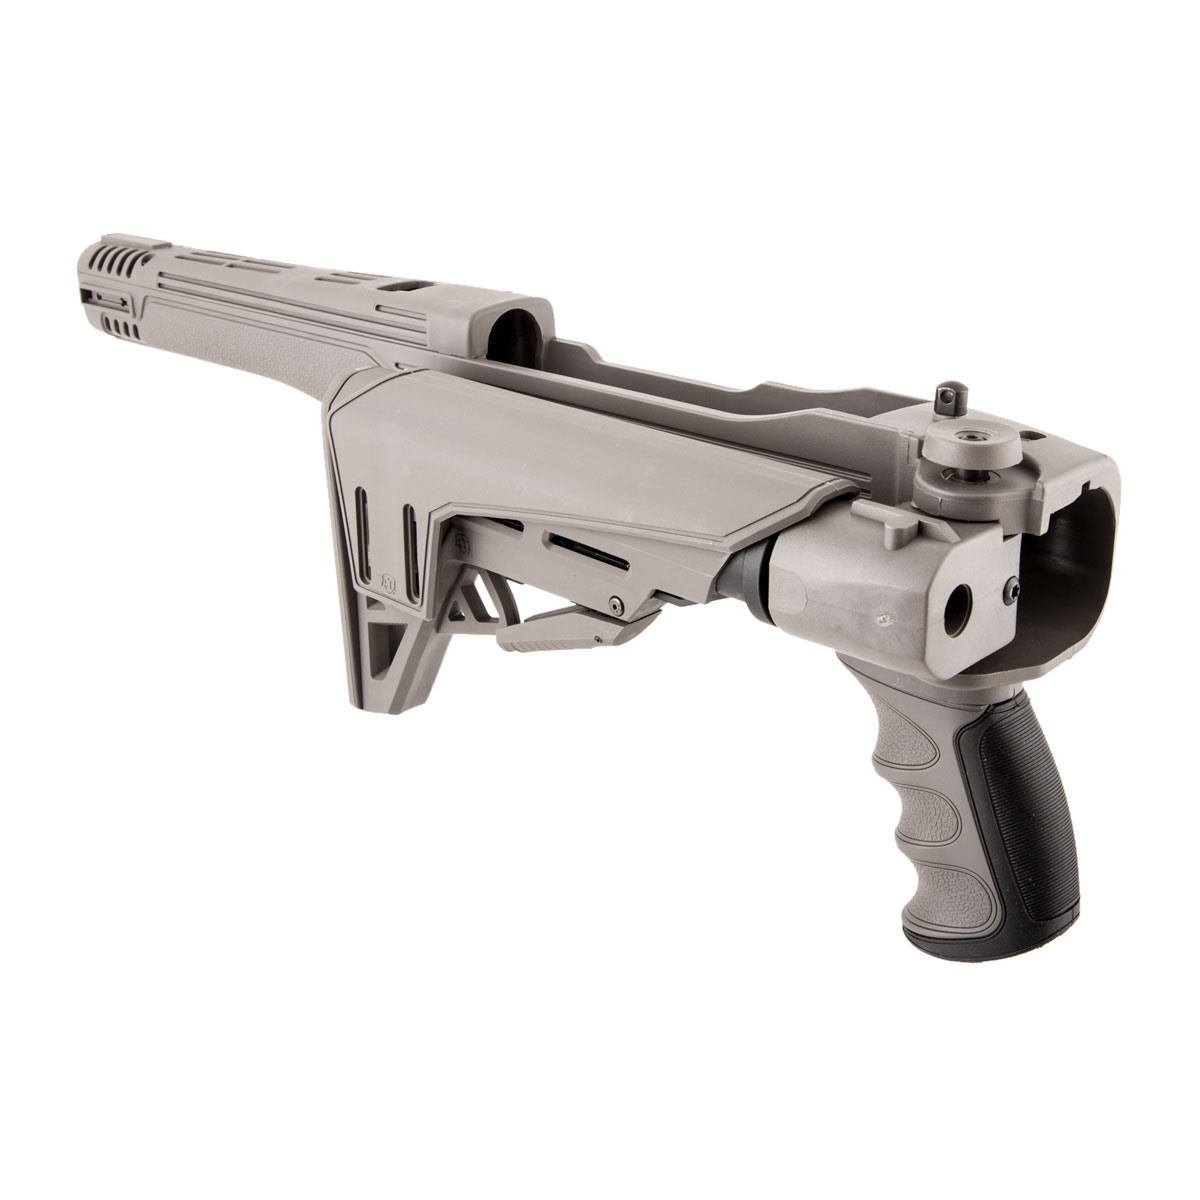 Ruger Ati Strikeforce Stocks Folding Adjustable Rifle Brownells Gray Open S...